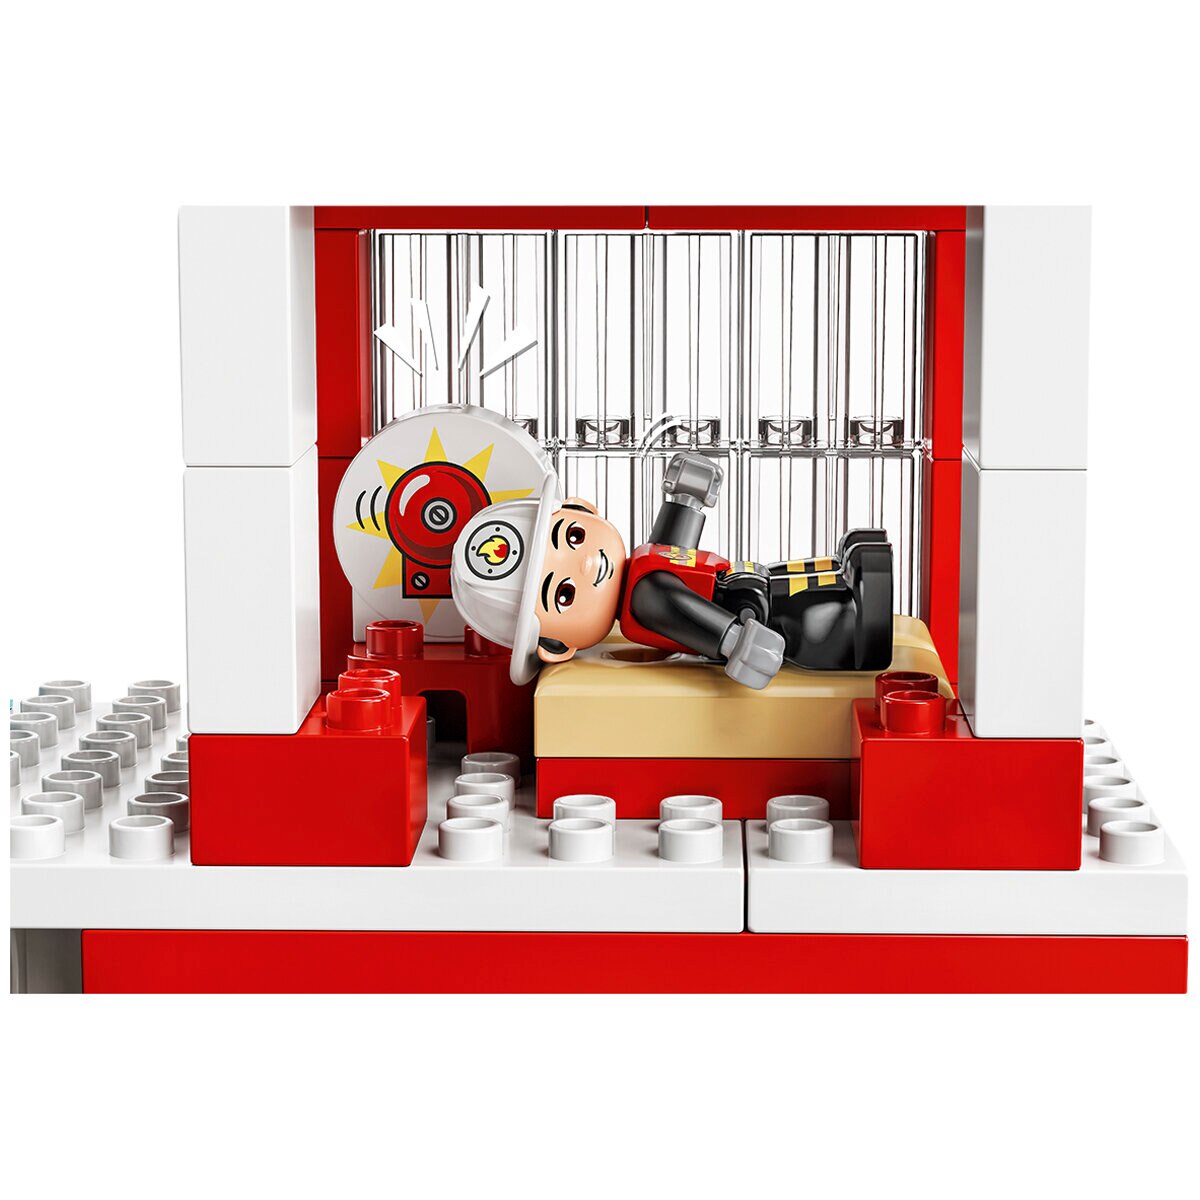 LEGO Duplo Fire Station and Helicopter 10973